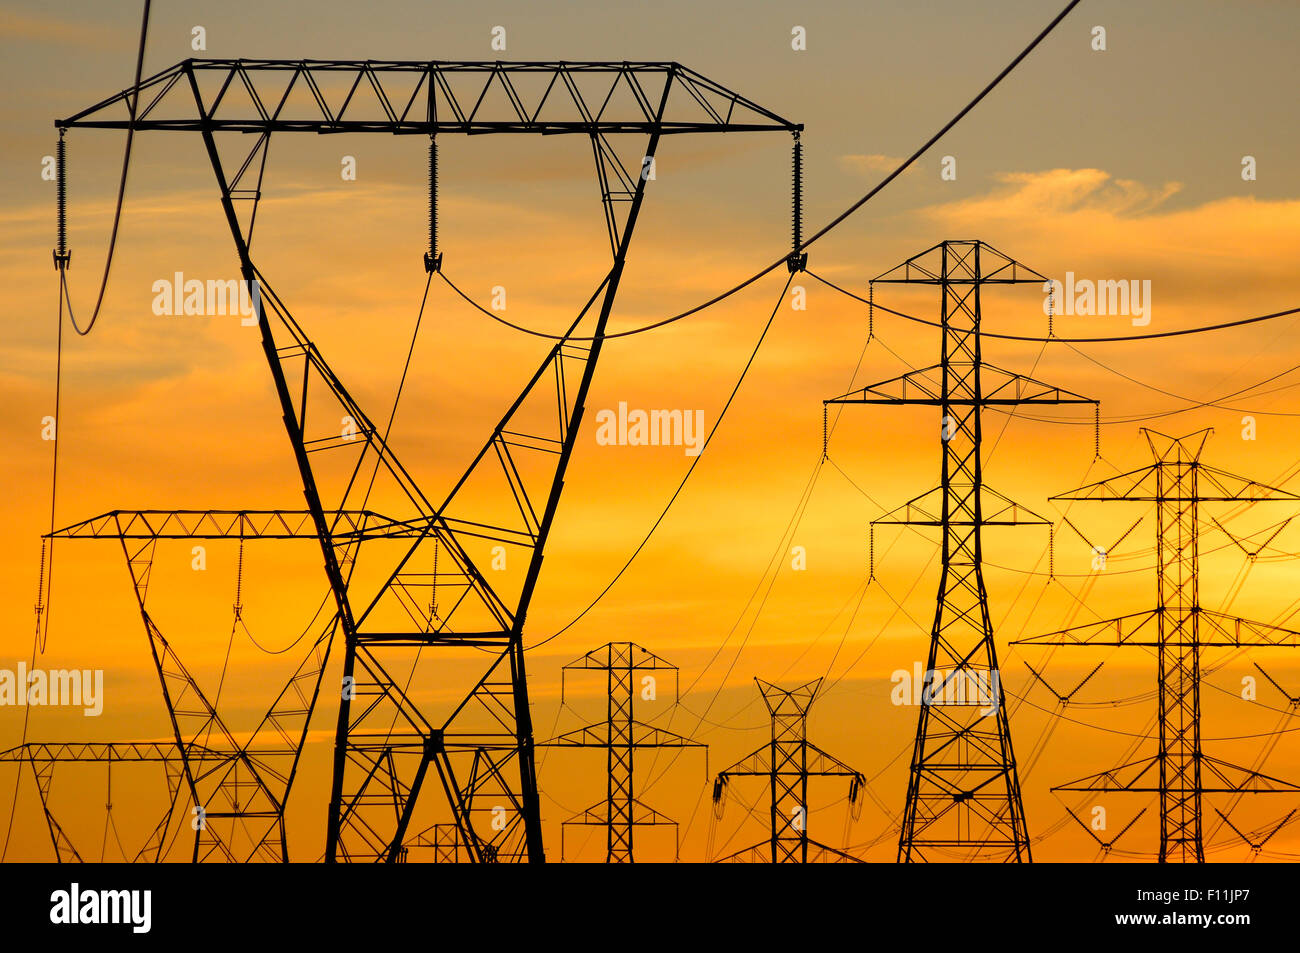 Silhouette of power lines under sunset sky Stock Photo